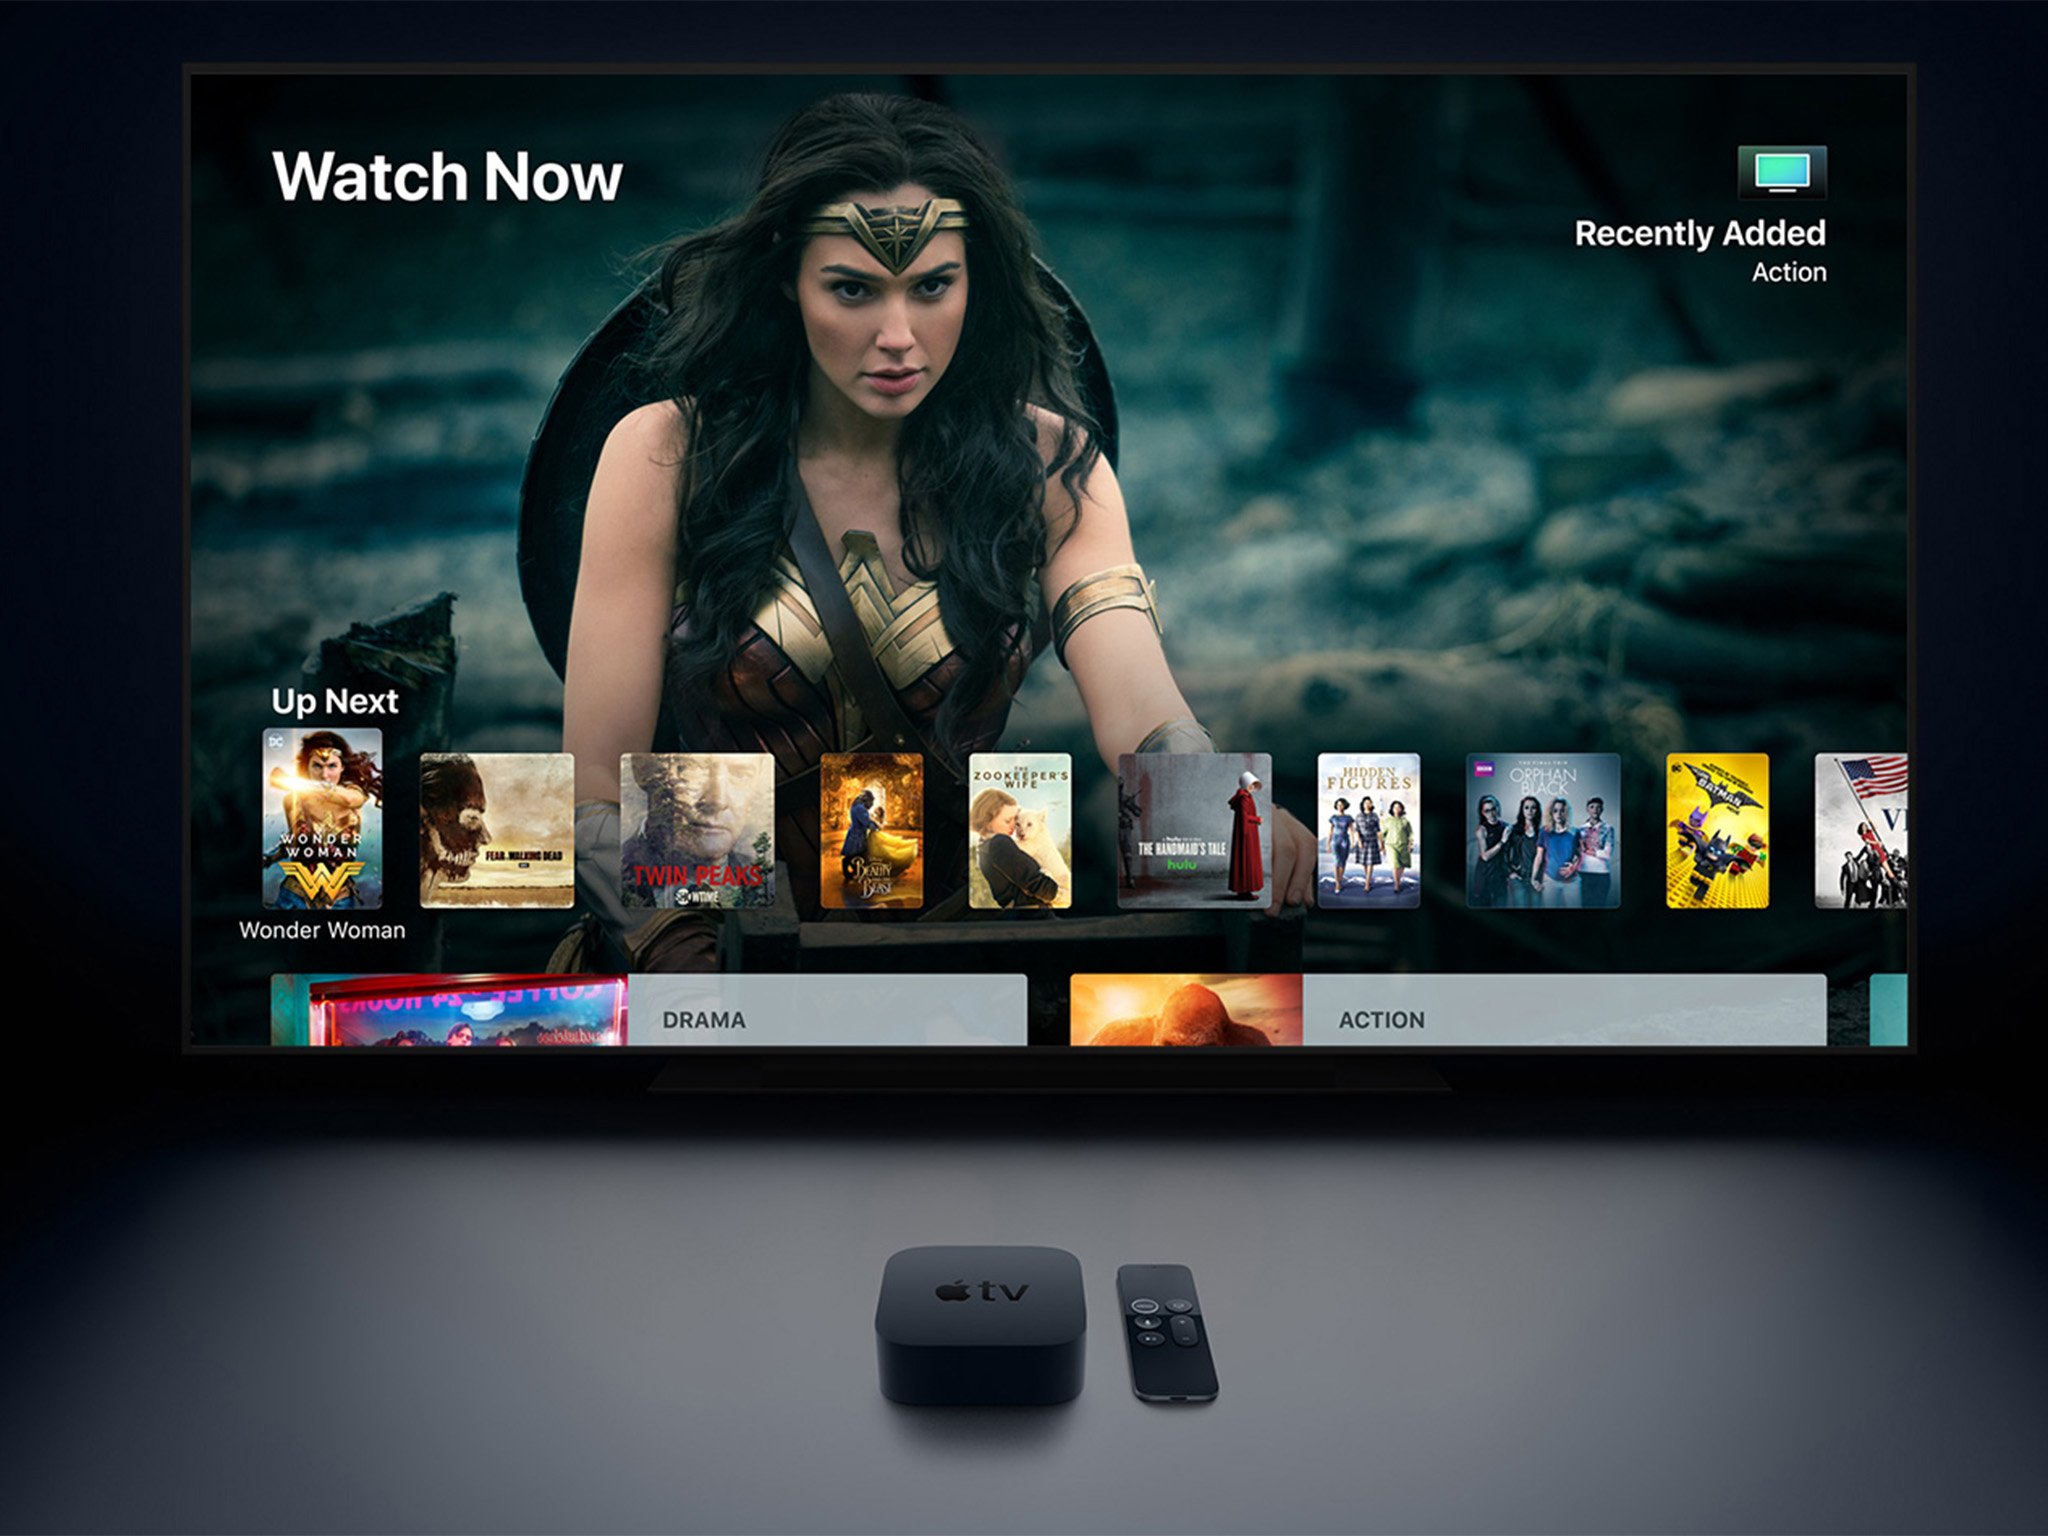 Apple TV 4K is shown sitting in front of a flat screen television.